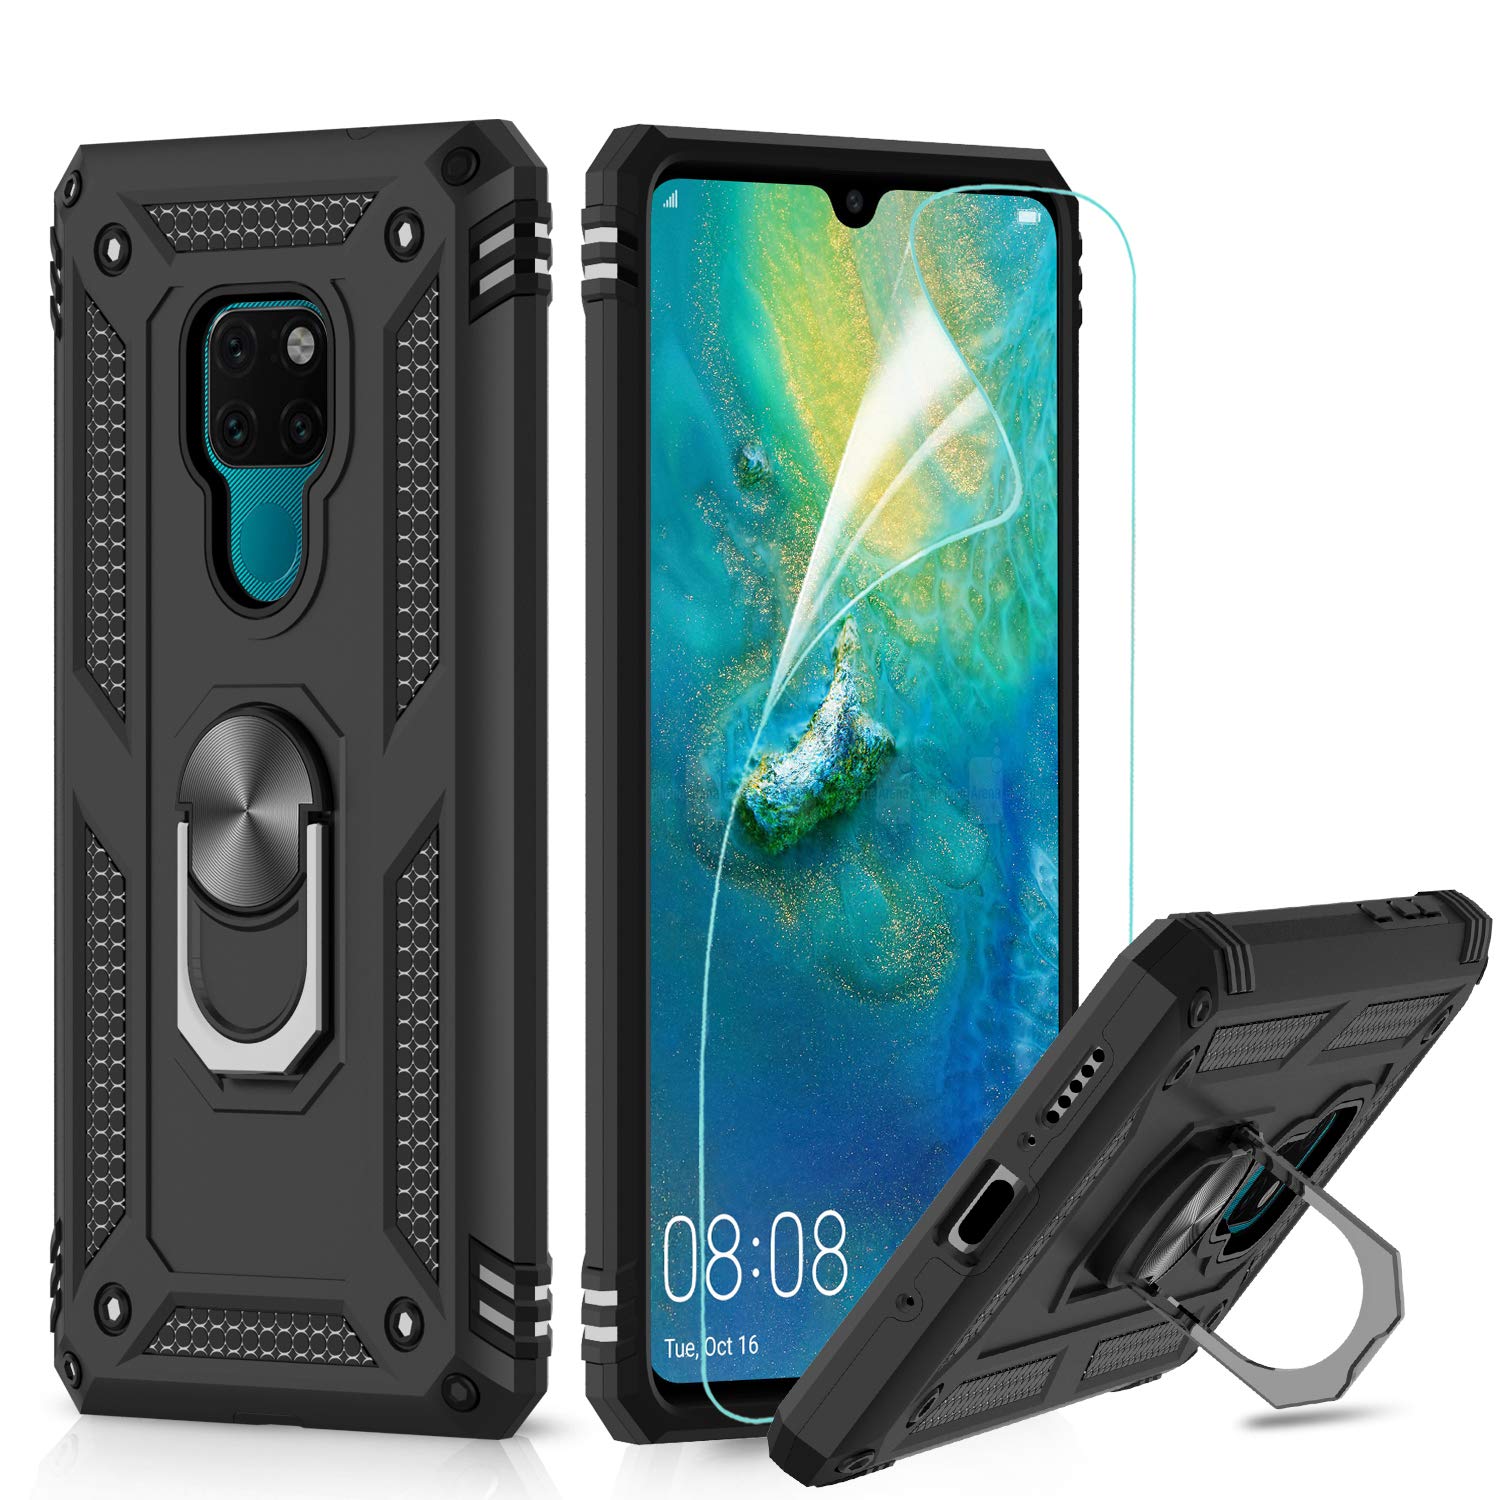 Huawei Mate 20 Lite Funda, Huawei Mate 20 Lite Stand Case, Huawei Mate 20  Lite Ring Holder Case, Finger Loop Case with 360 Degree Rotatory Ring Stand